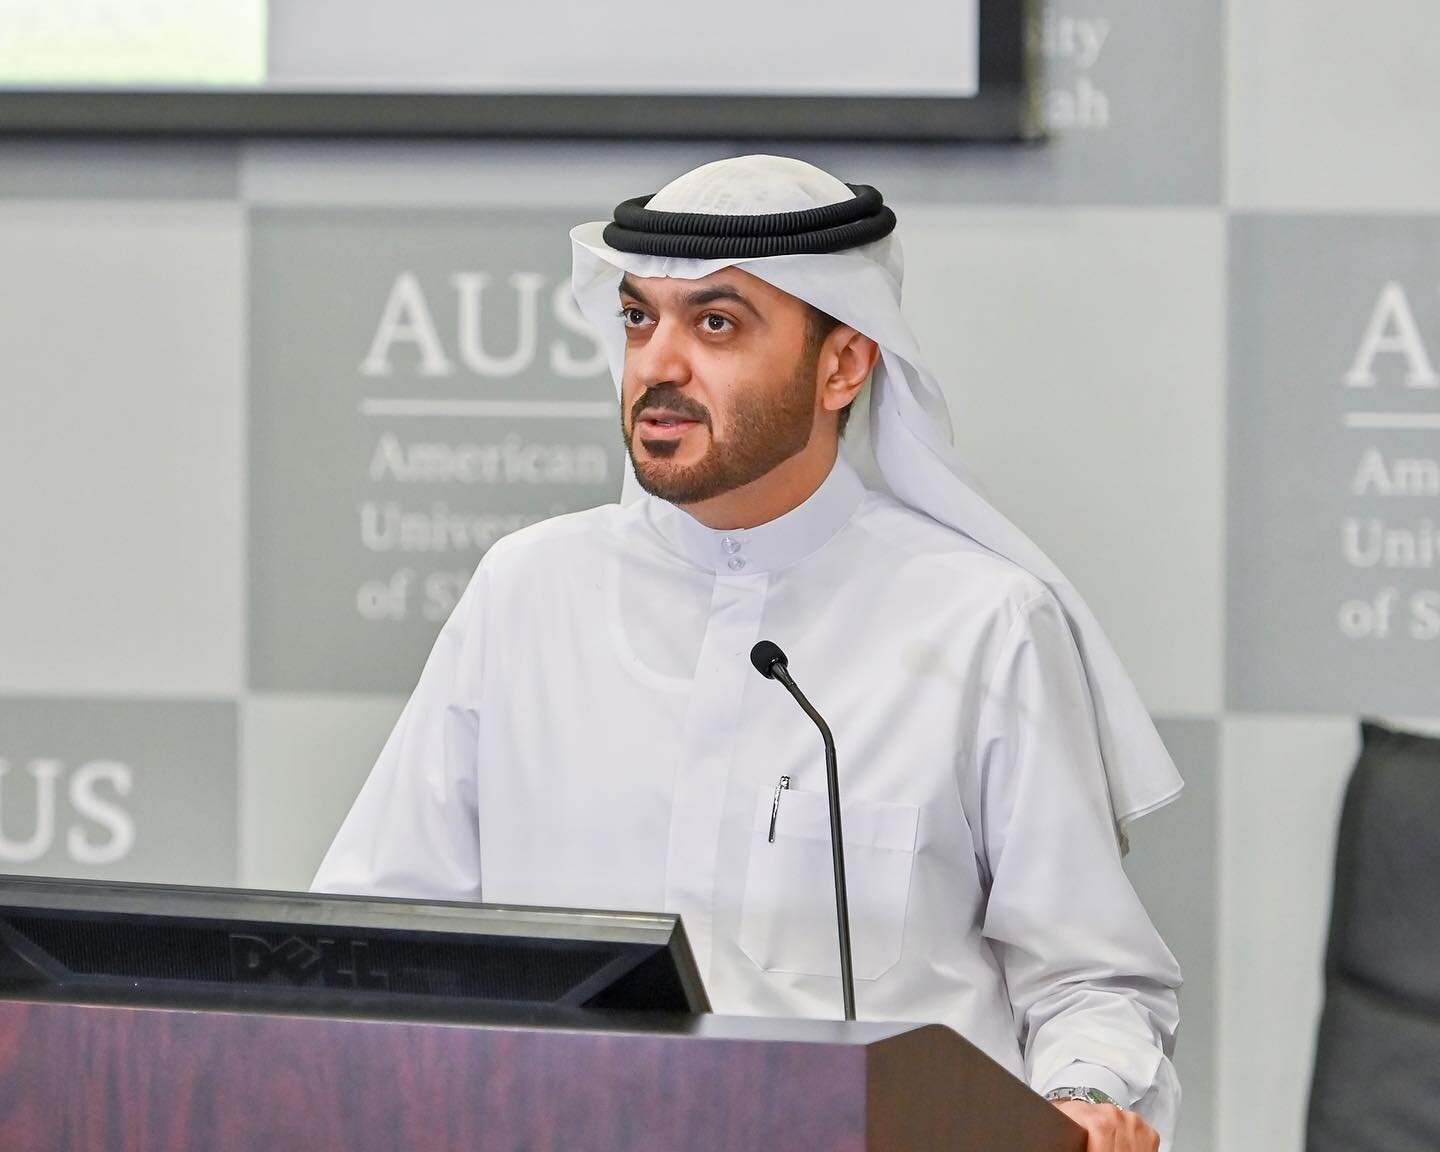 With the United Arab Emirates hosting COP28 this year, our event 'AUS-Shams Media Day' brought together a plethora of high school and university students from across the UAE to celebrate media projects addressing climate change under the theme of &ls